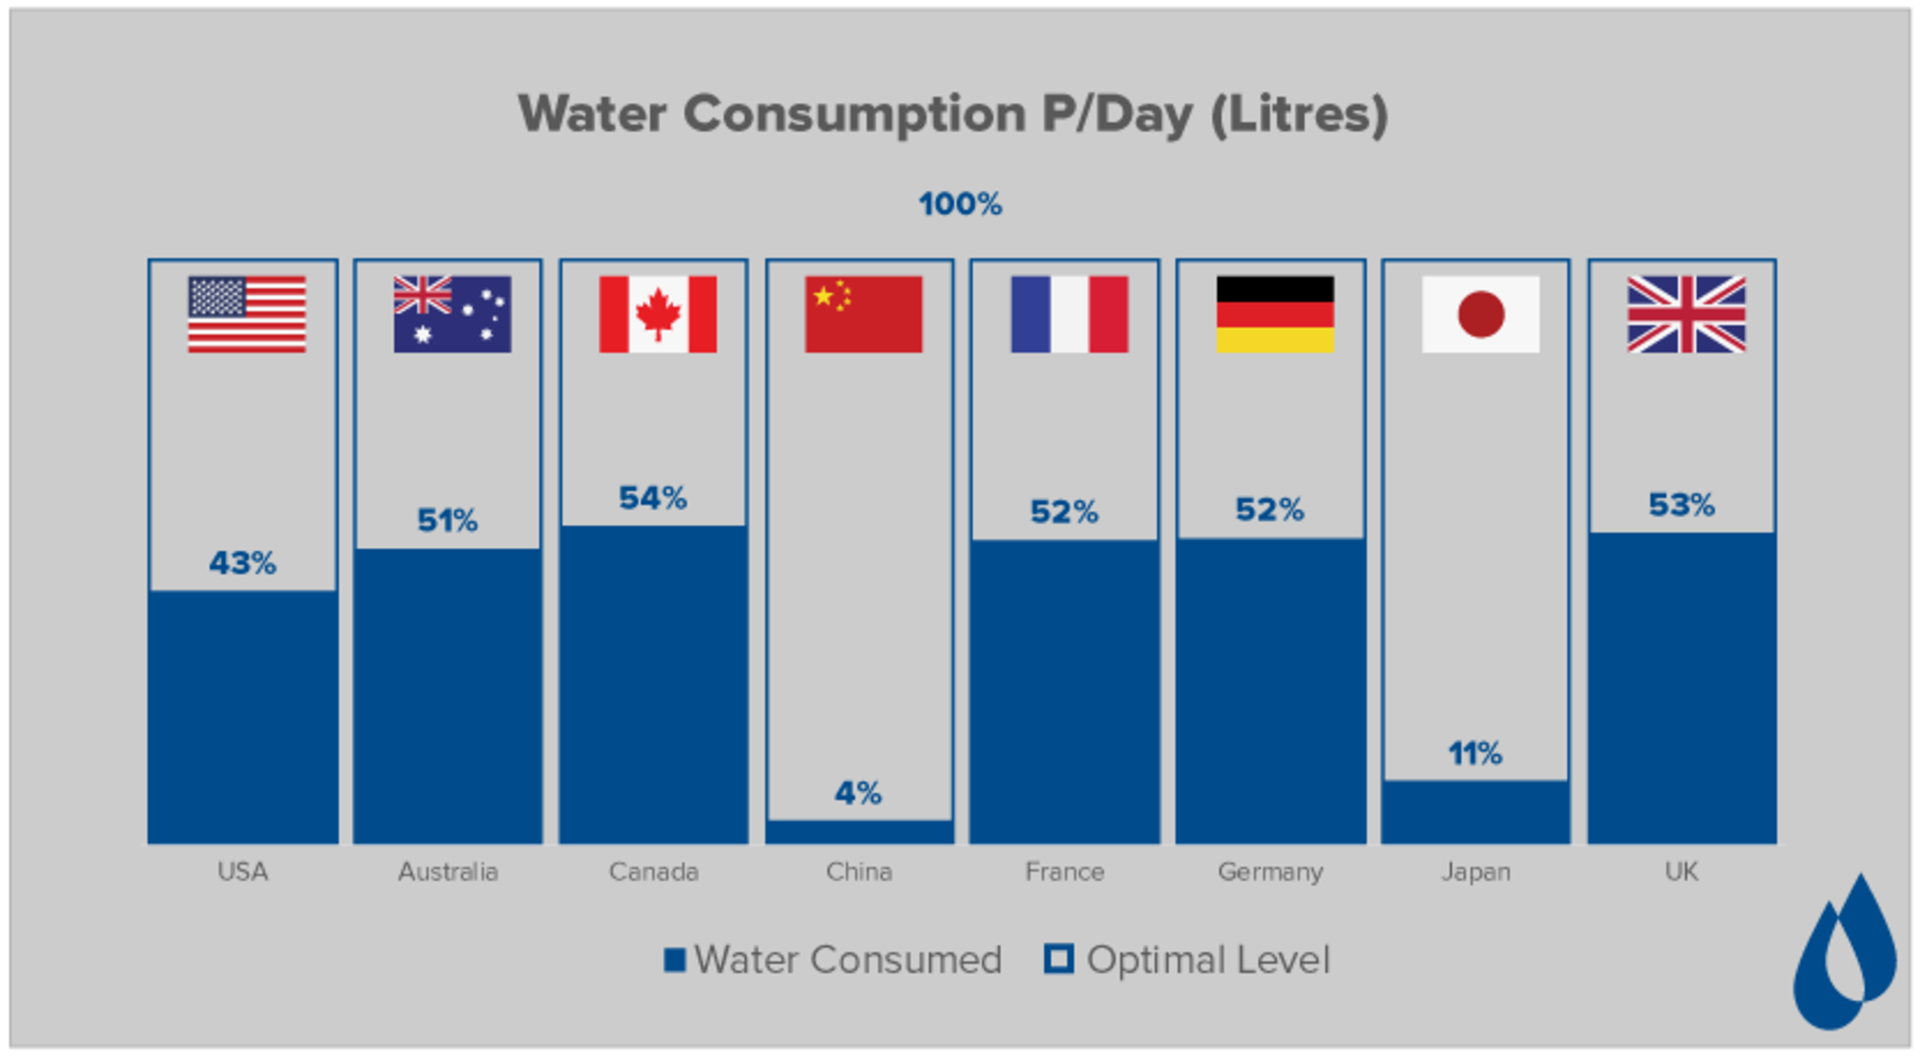 Global water consumption